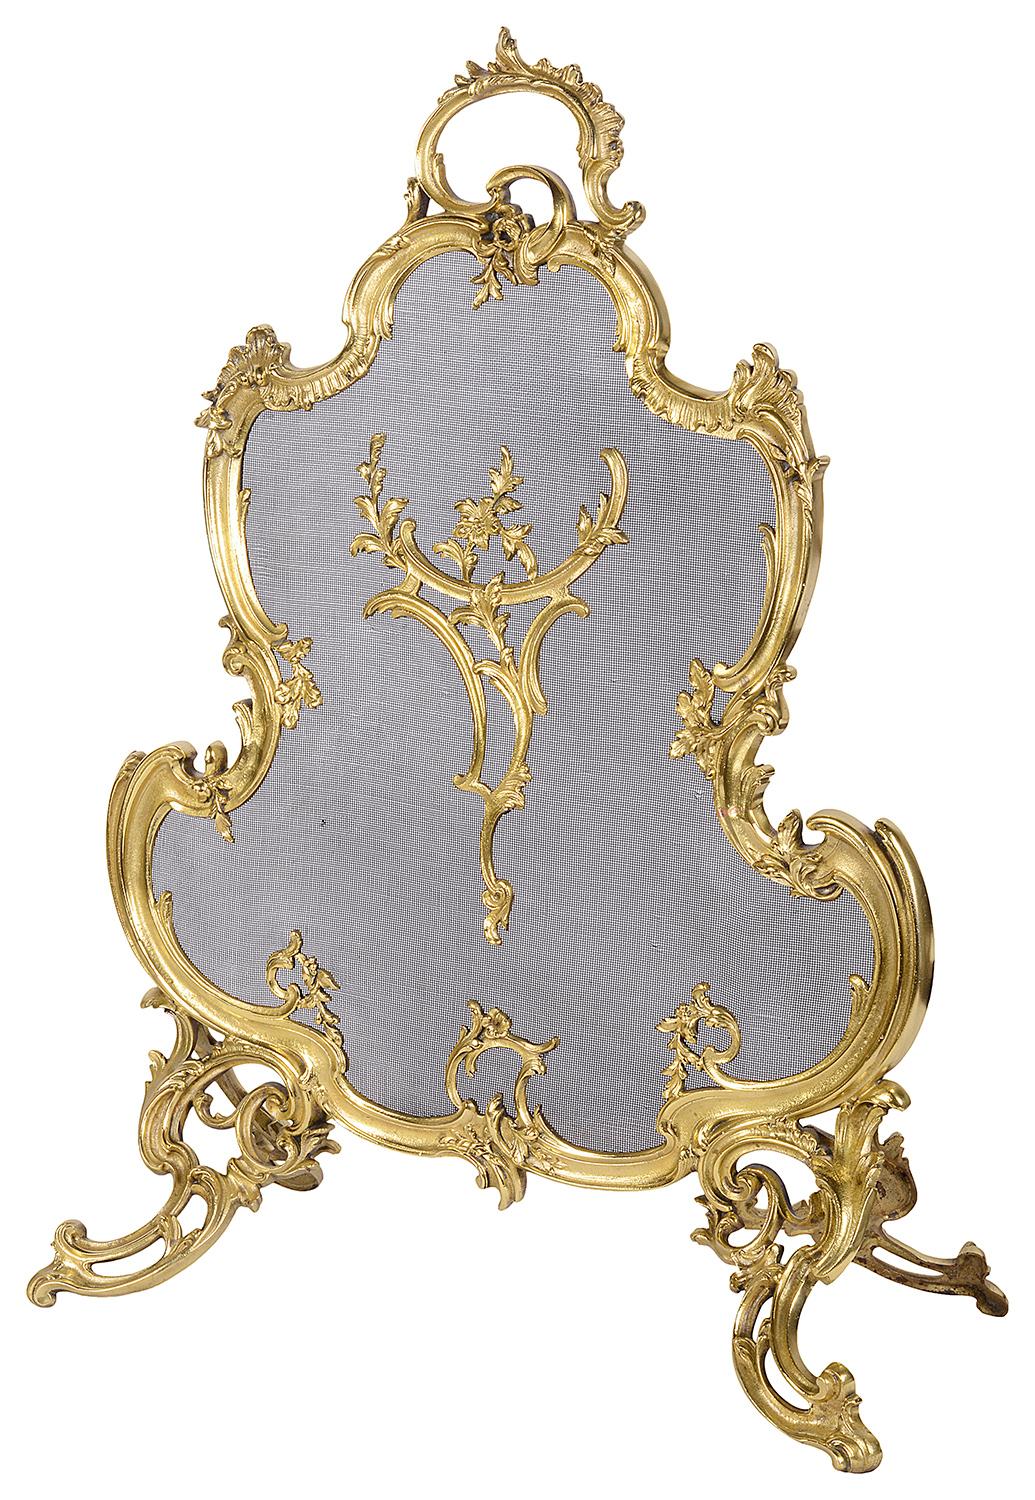 A very good quality pair of late 19th century French gilded ormolu Rococo style fire screens, each with elegant scrolling foliate decoration.